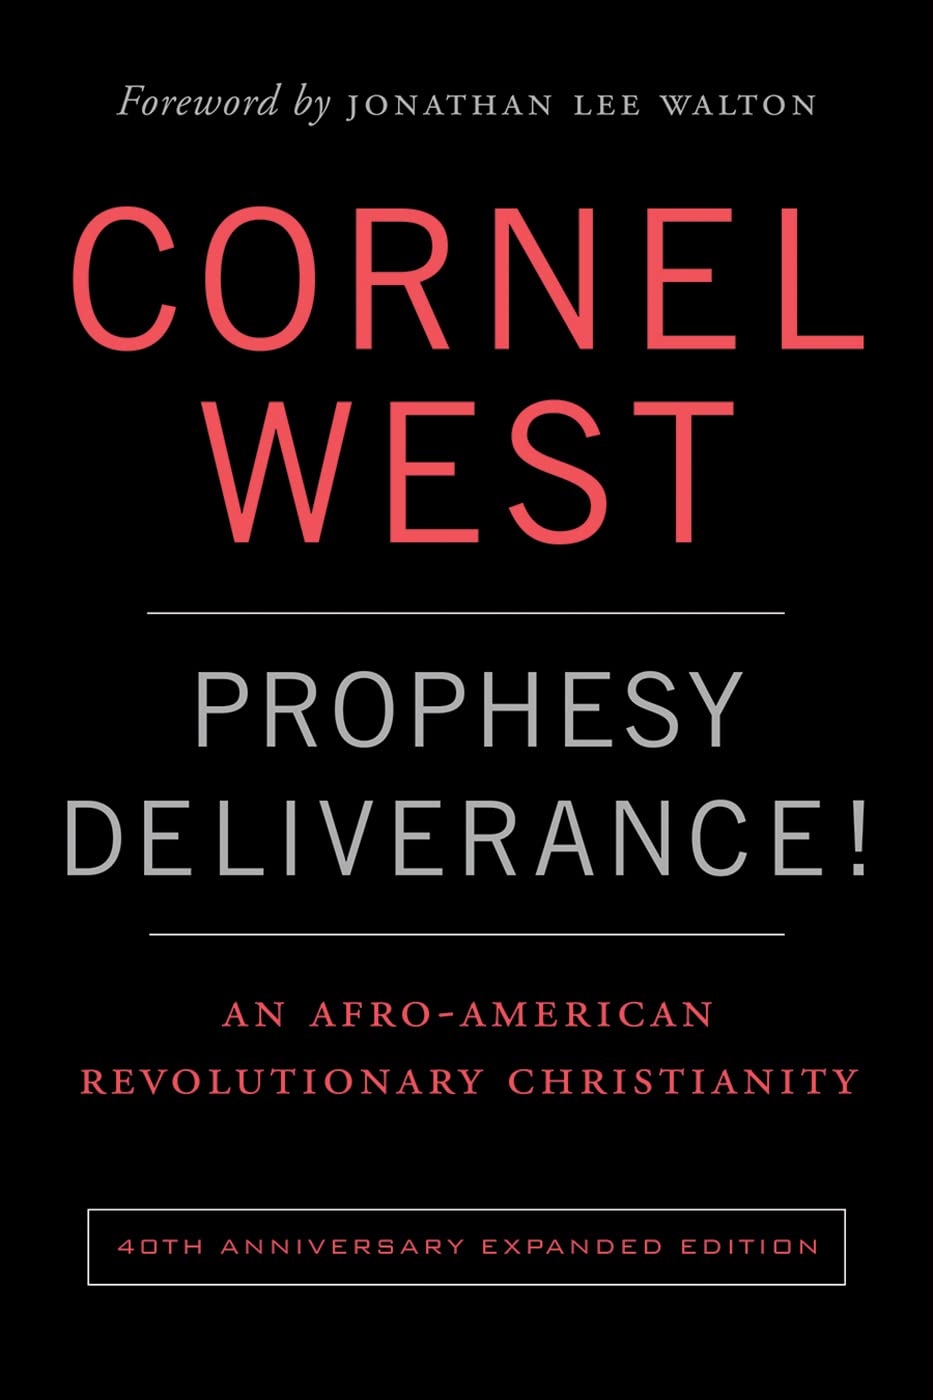 Prophecy Deliverance!, by Cornel West